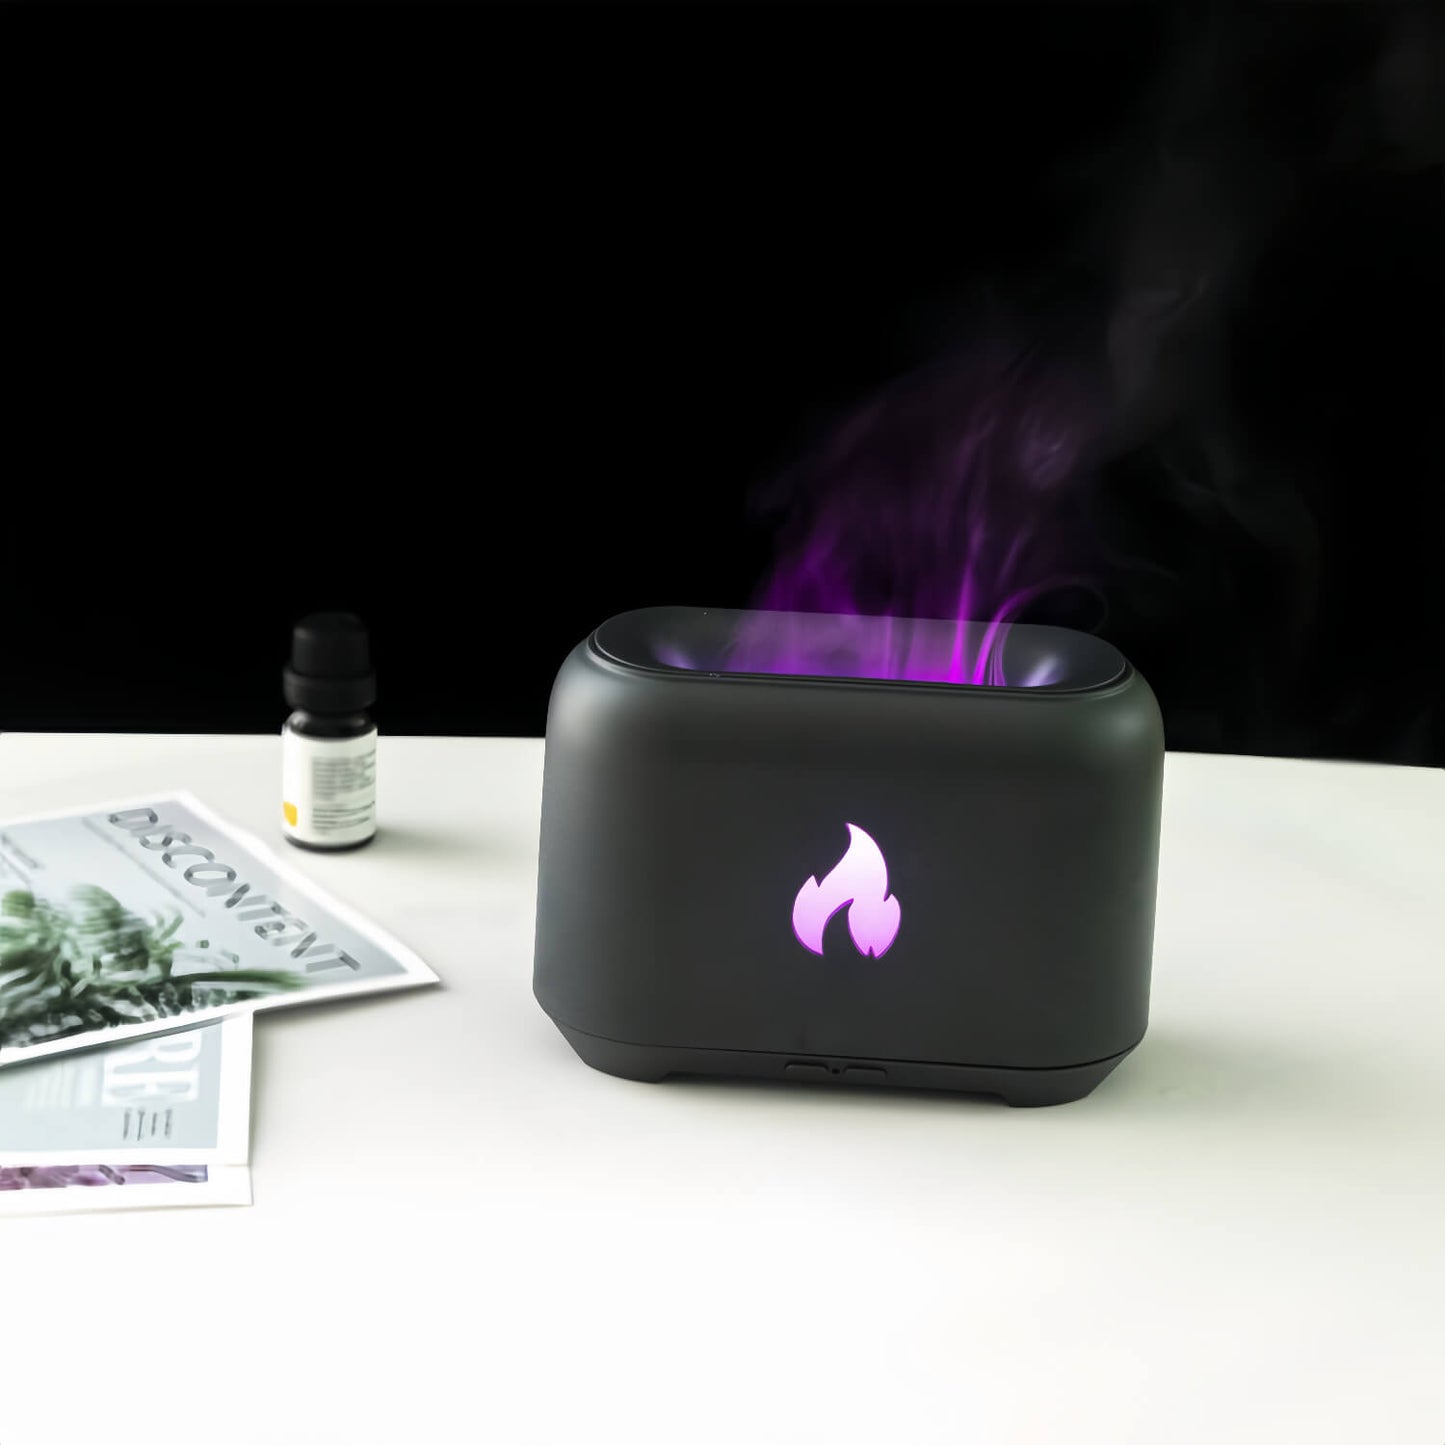 Conveniently power up our Colorful Flame Aroma Humidifier with USB connectivity.